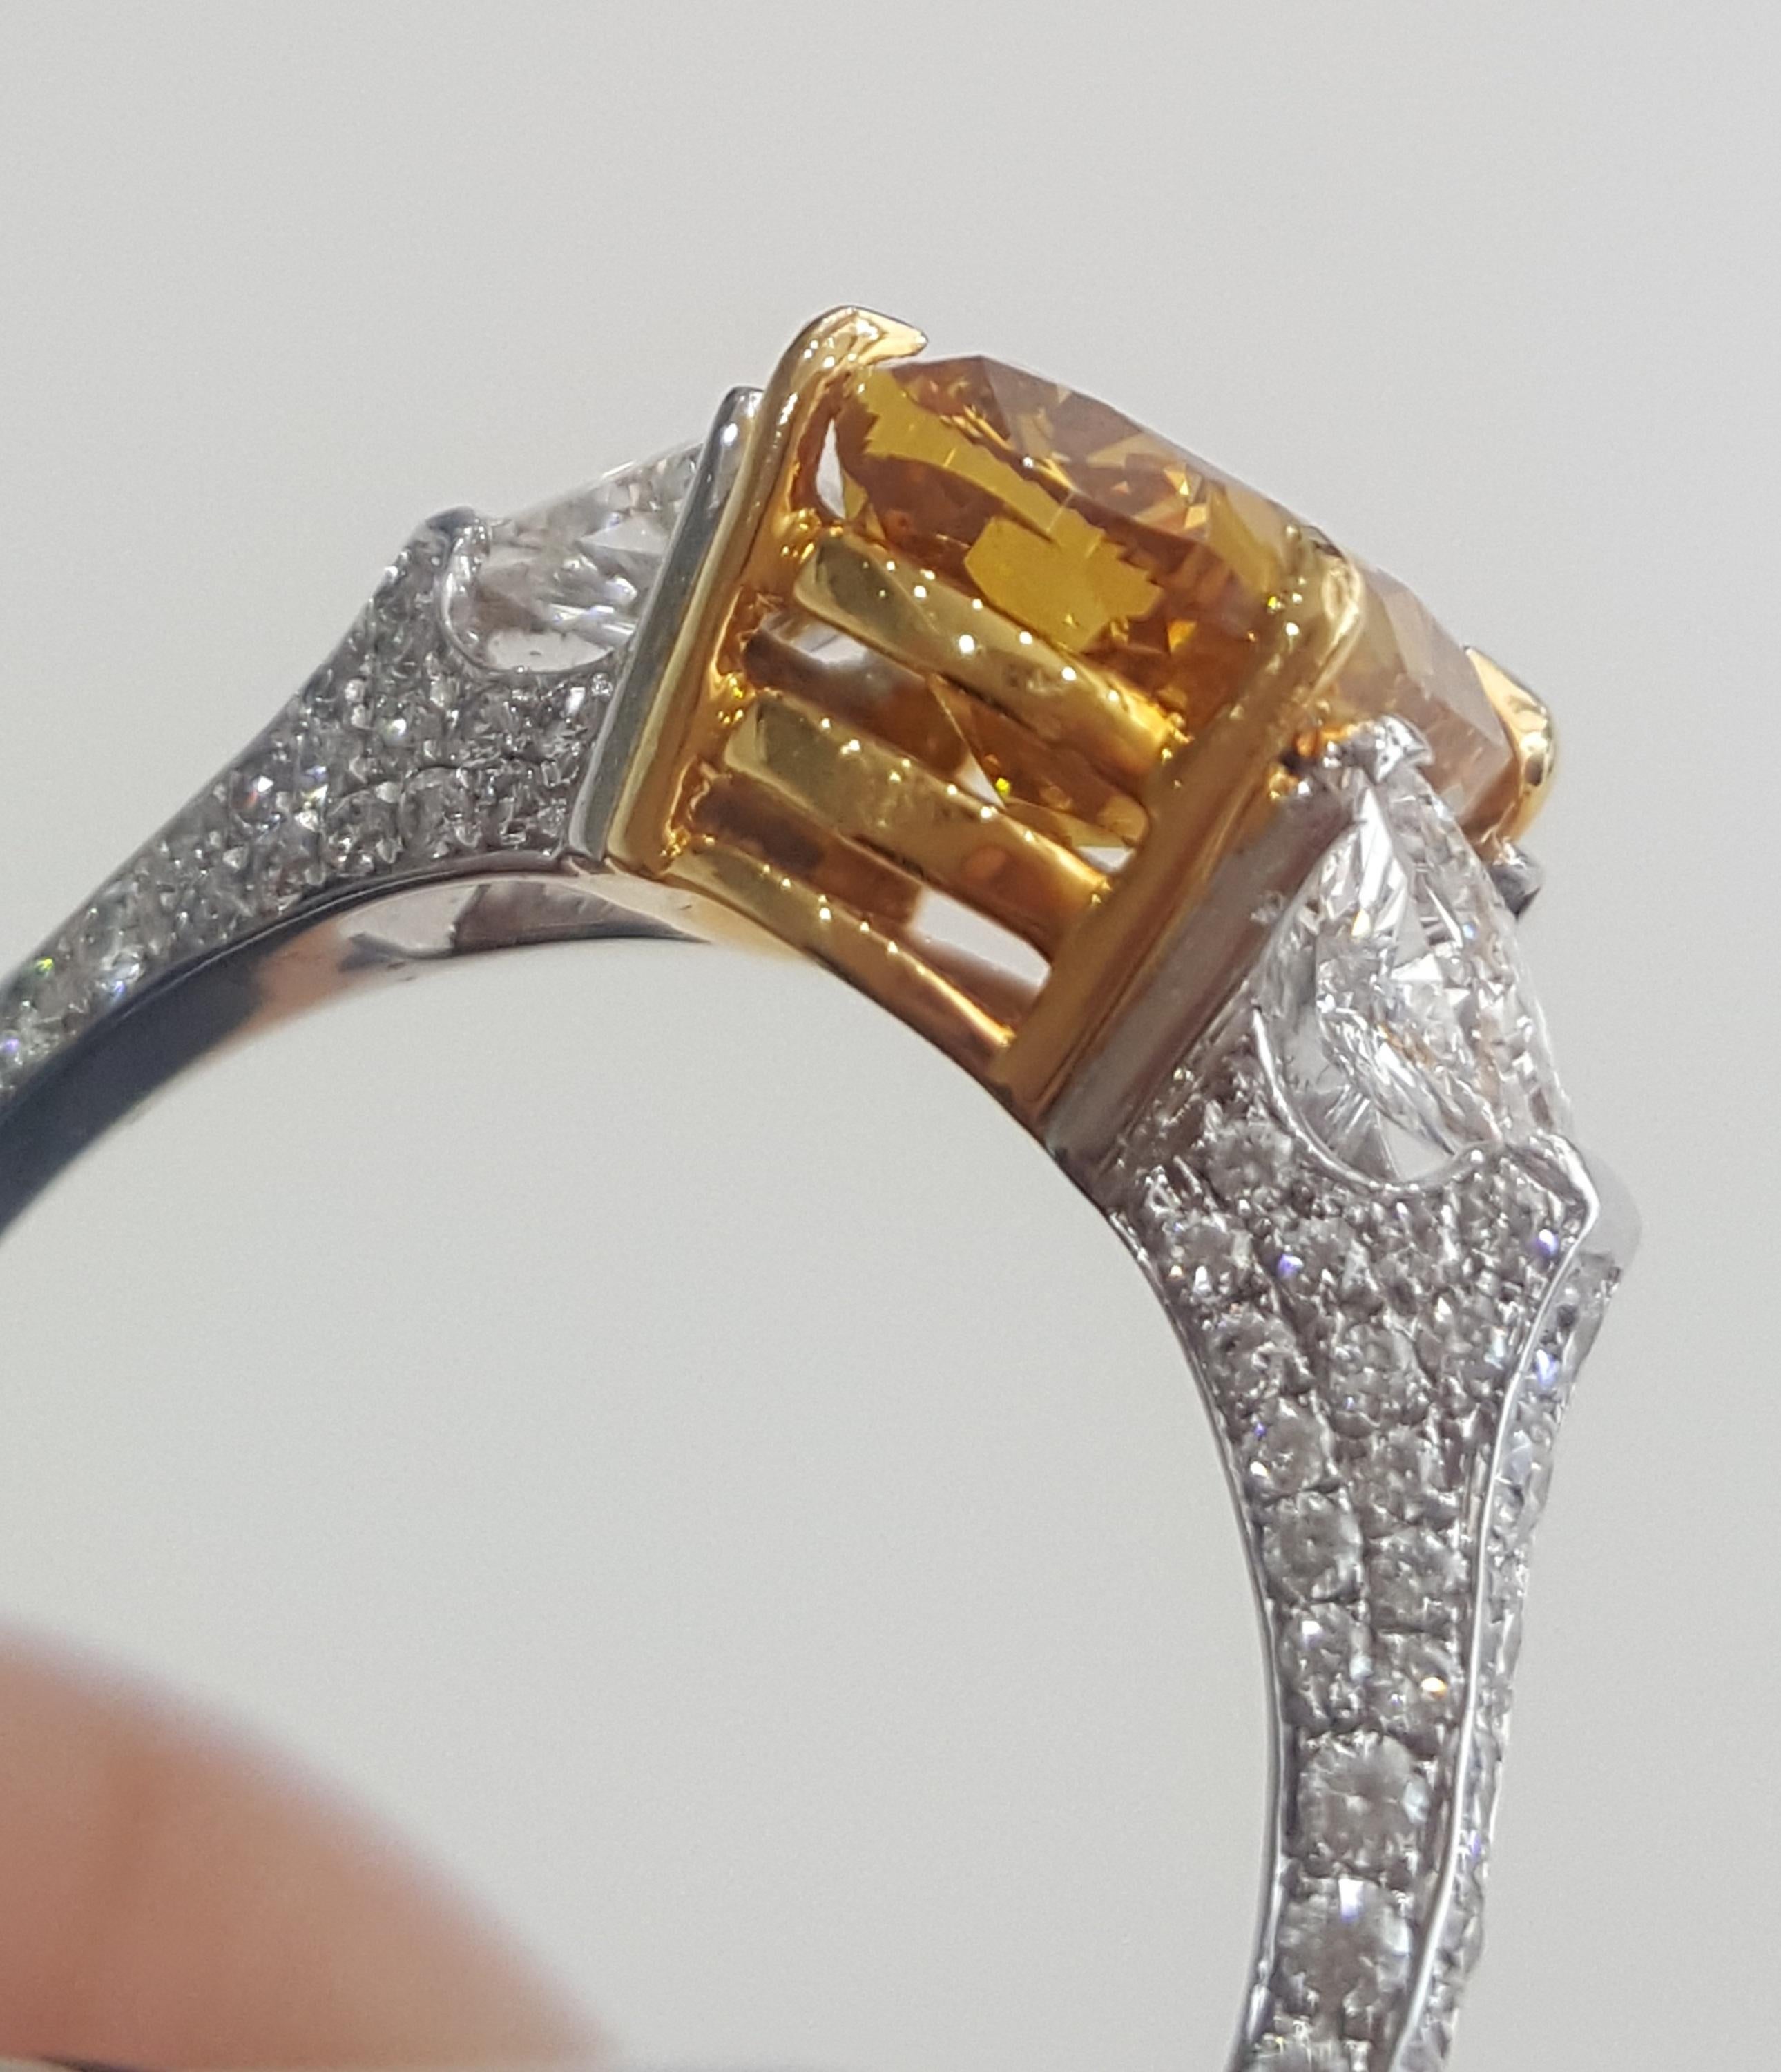 Women's or Men's GIA 4.43 Carat Natural Fancy Deep Orange Yellow Oval And White Diamond Ring.  For Sale